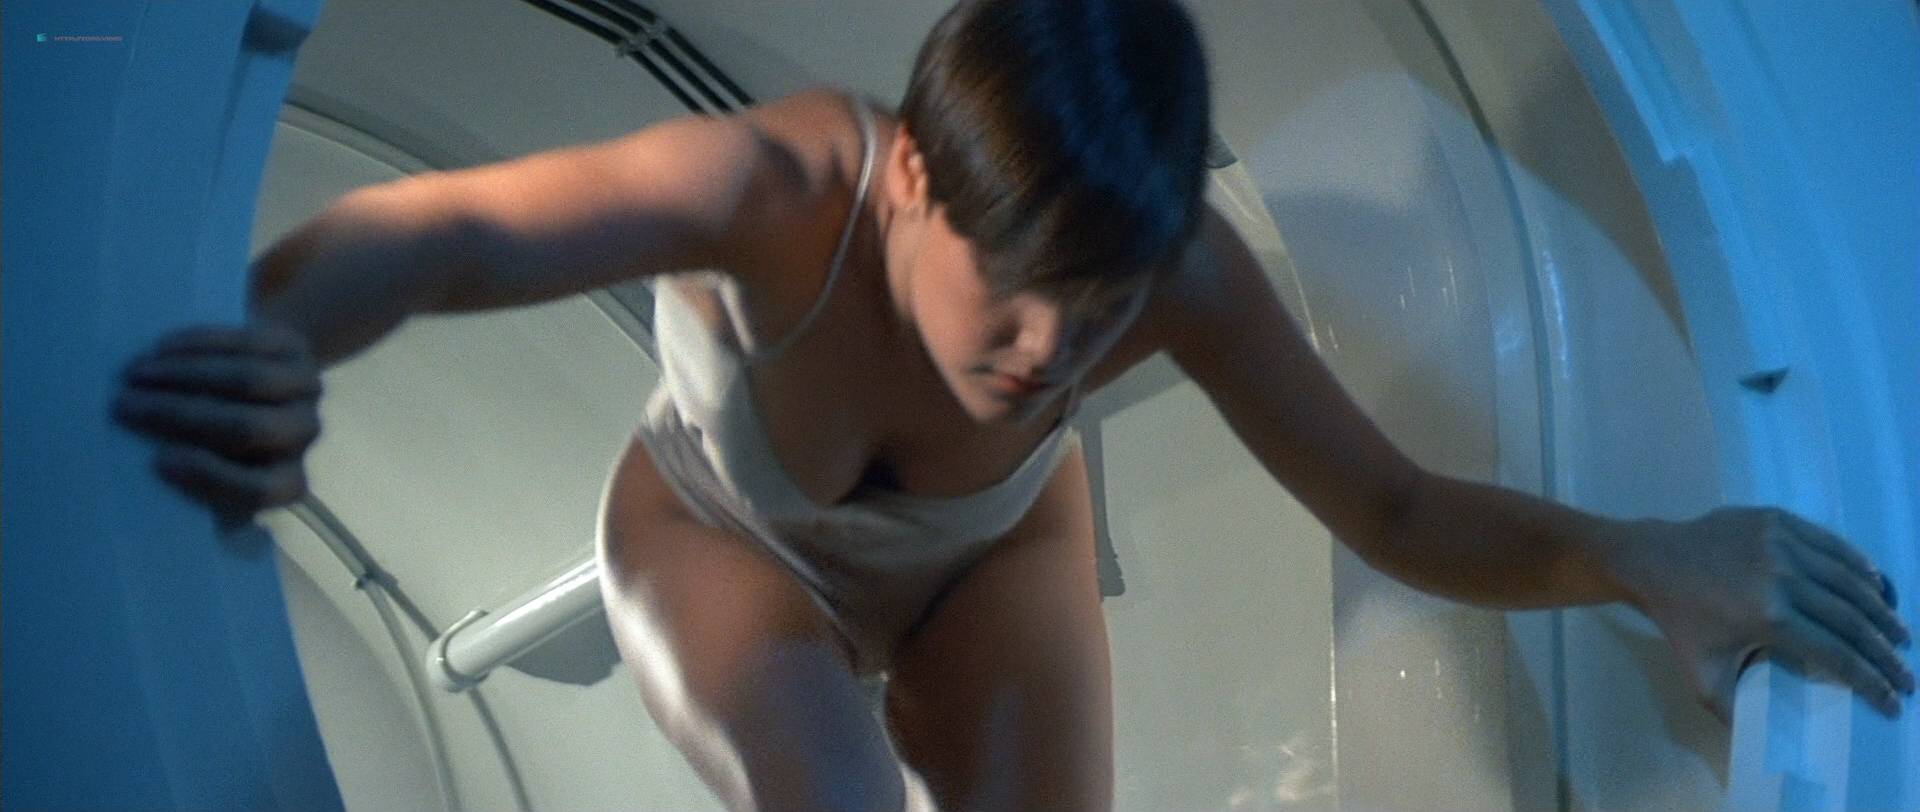 Carey Lowell hot leggy Talisa Soto hot and sexy - Licence to Kill (1989) HD 1080p BluRay (10)